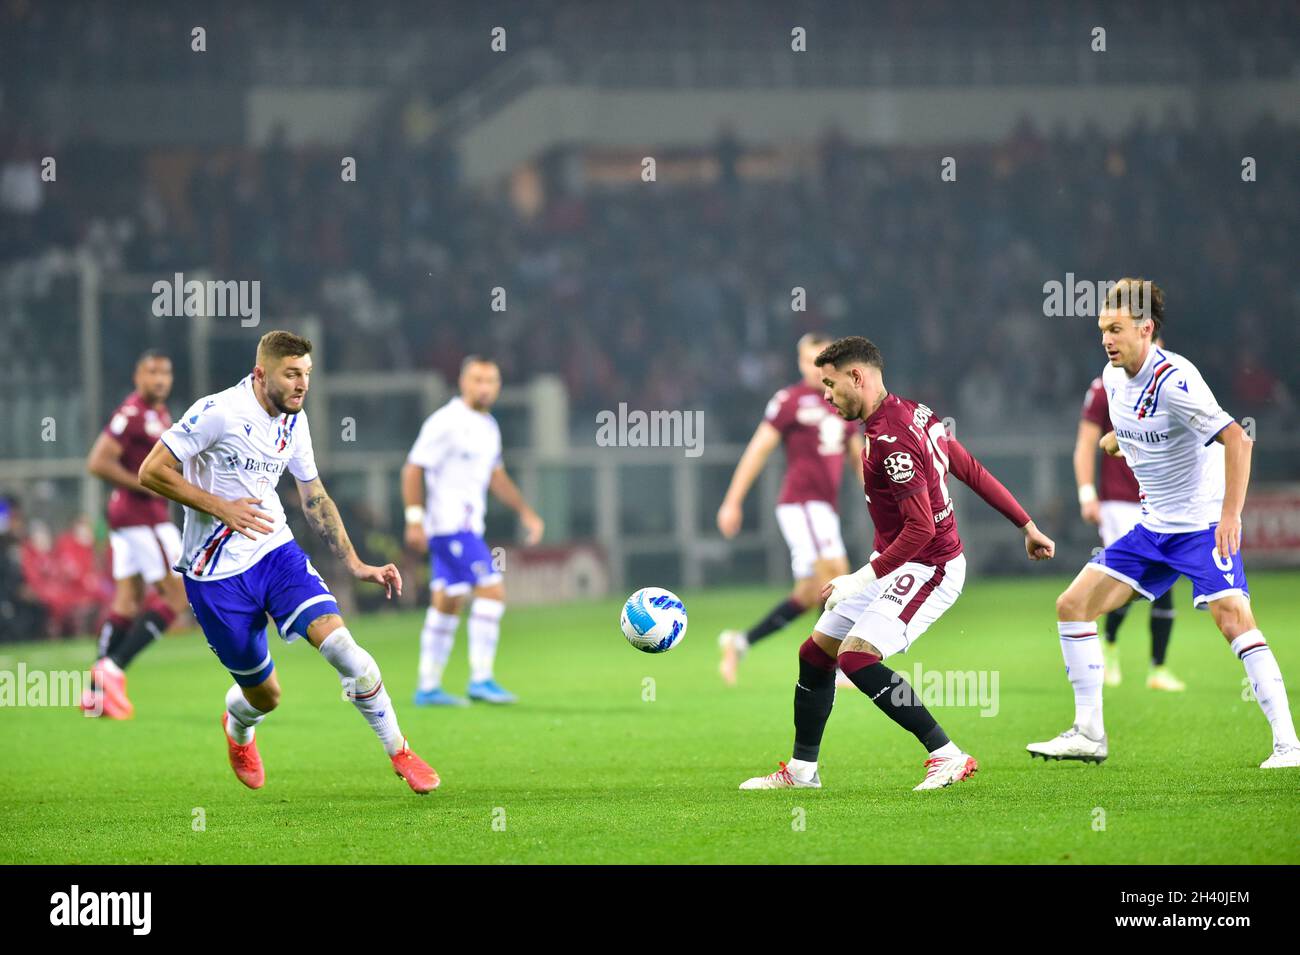 Torino, Italy. 30th Oct, 2021. Antonio Sanabria of Torino FC, Julian Chabot of UC Sampdoria, during the Serie A match between Torino FC and UC Sampdoria on October, 30th, 2021 at Stadio Grande Torino in Torino, Italy. Picture by Credit: Antonio Polia/Alamy Live News Stock Photo